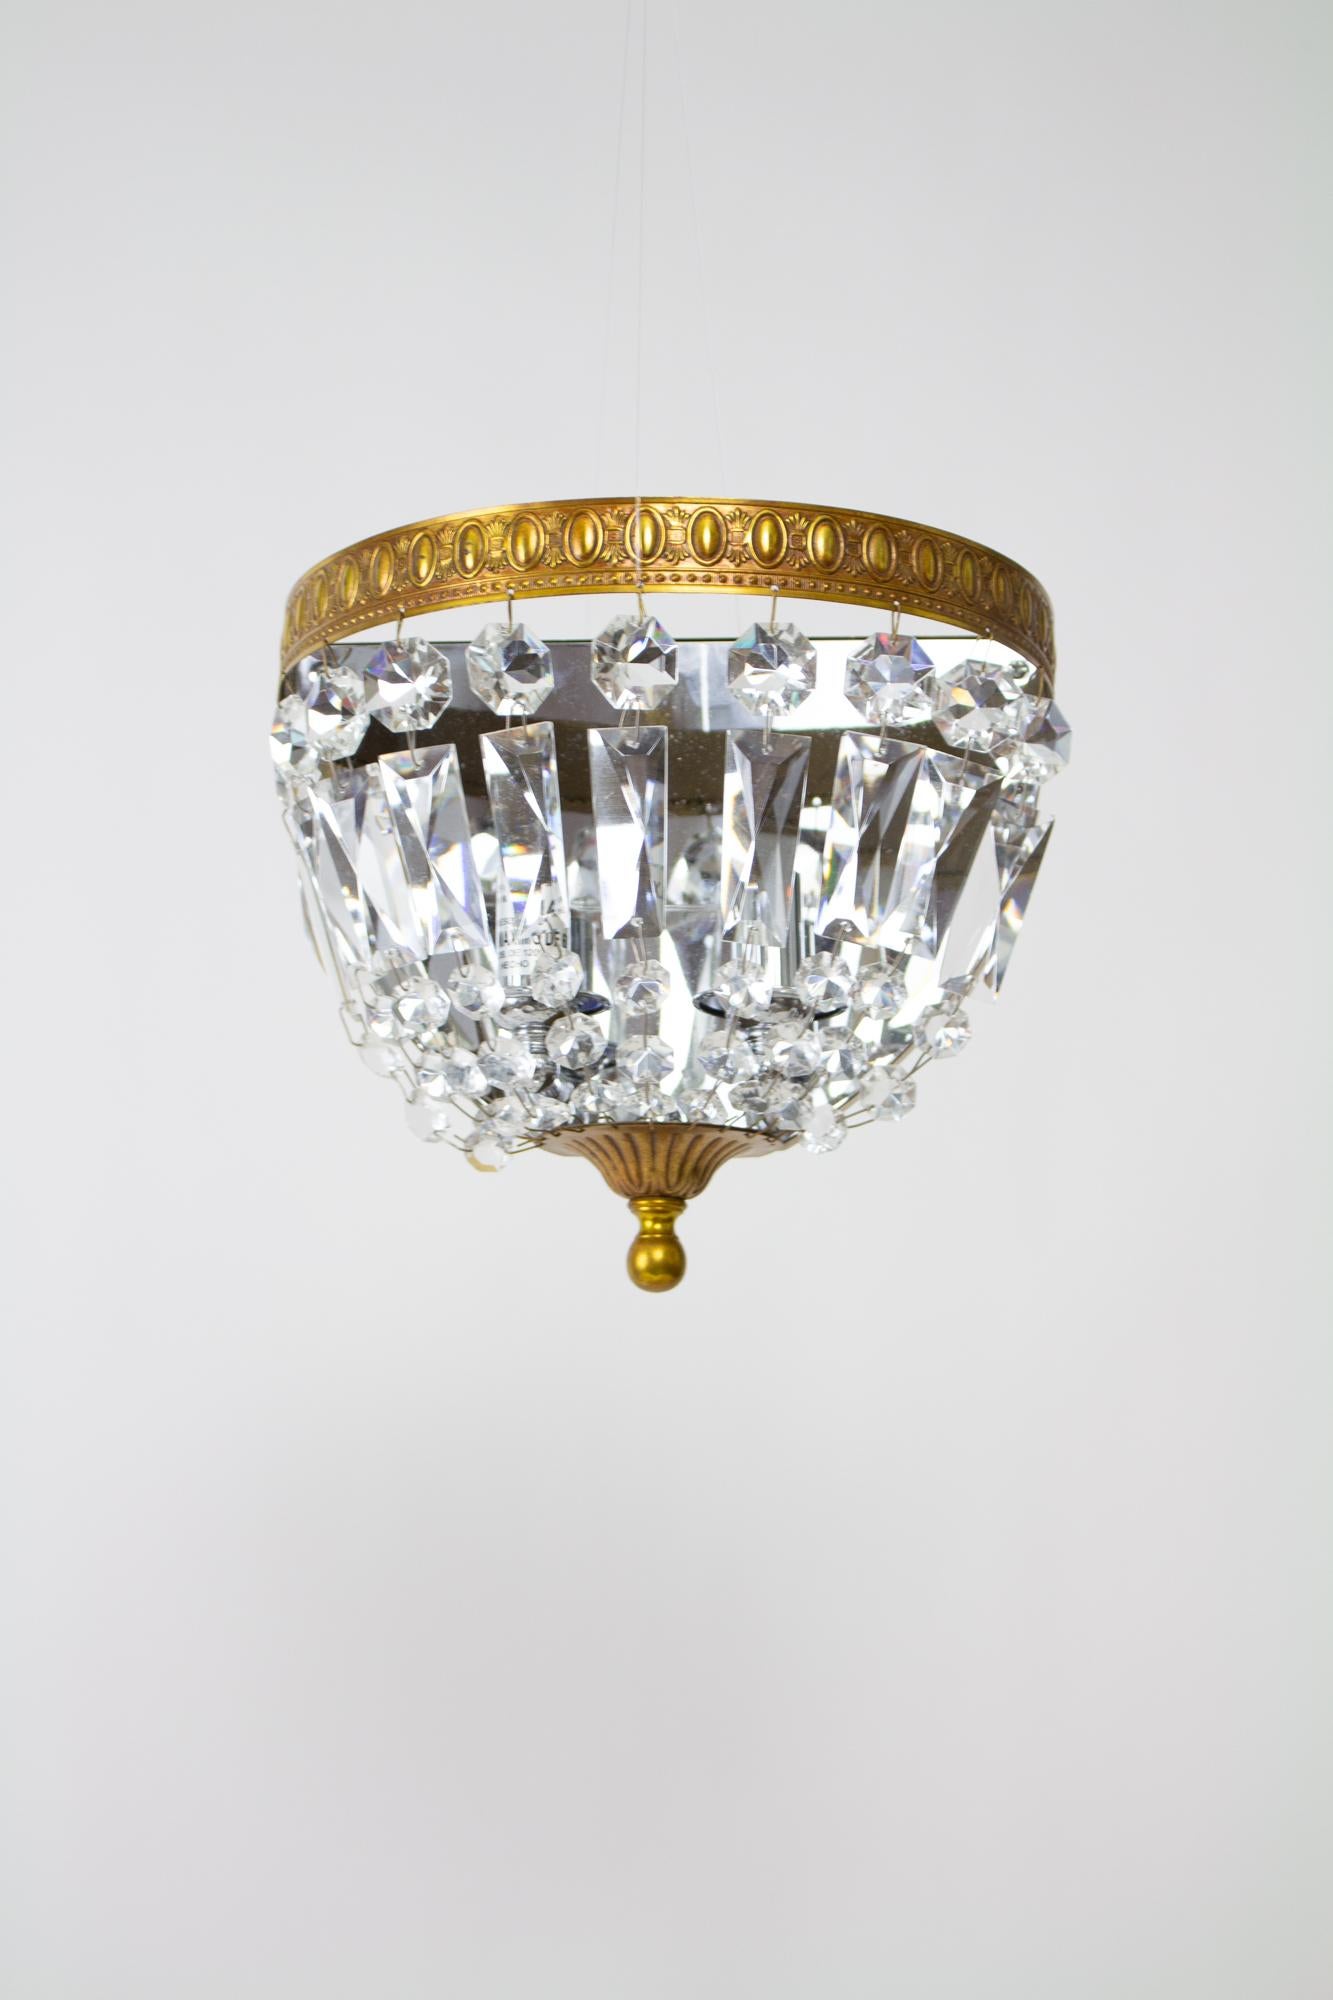 Hollywood Regency Late 20th Century Brass and Crystal Basket Sconces - a Pair For Sale